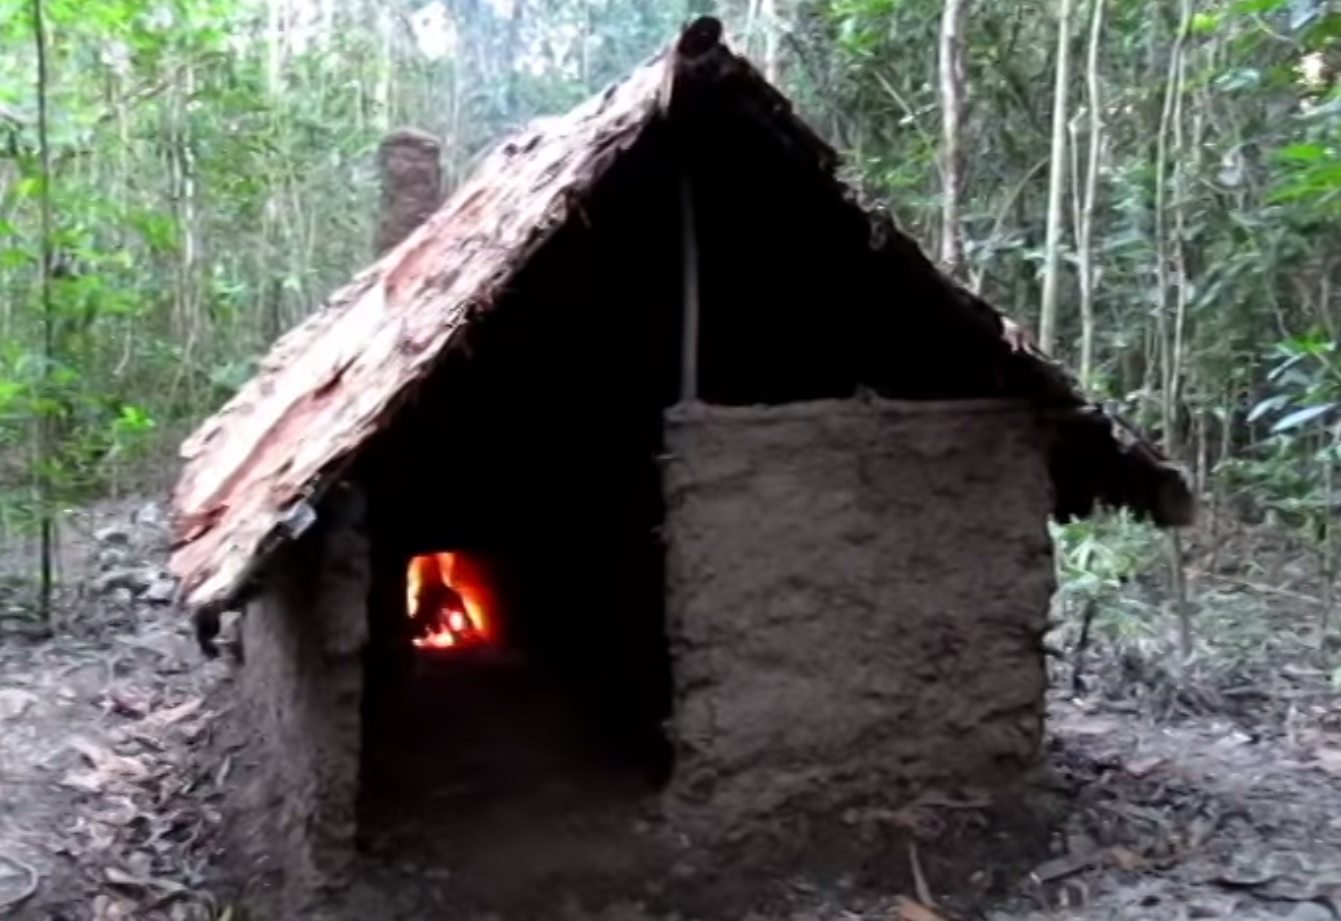 Video: How to Build a Long-term Survival Shelter with No Tools | OutdoorHub